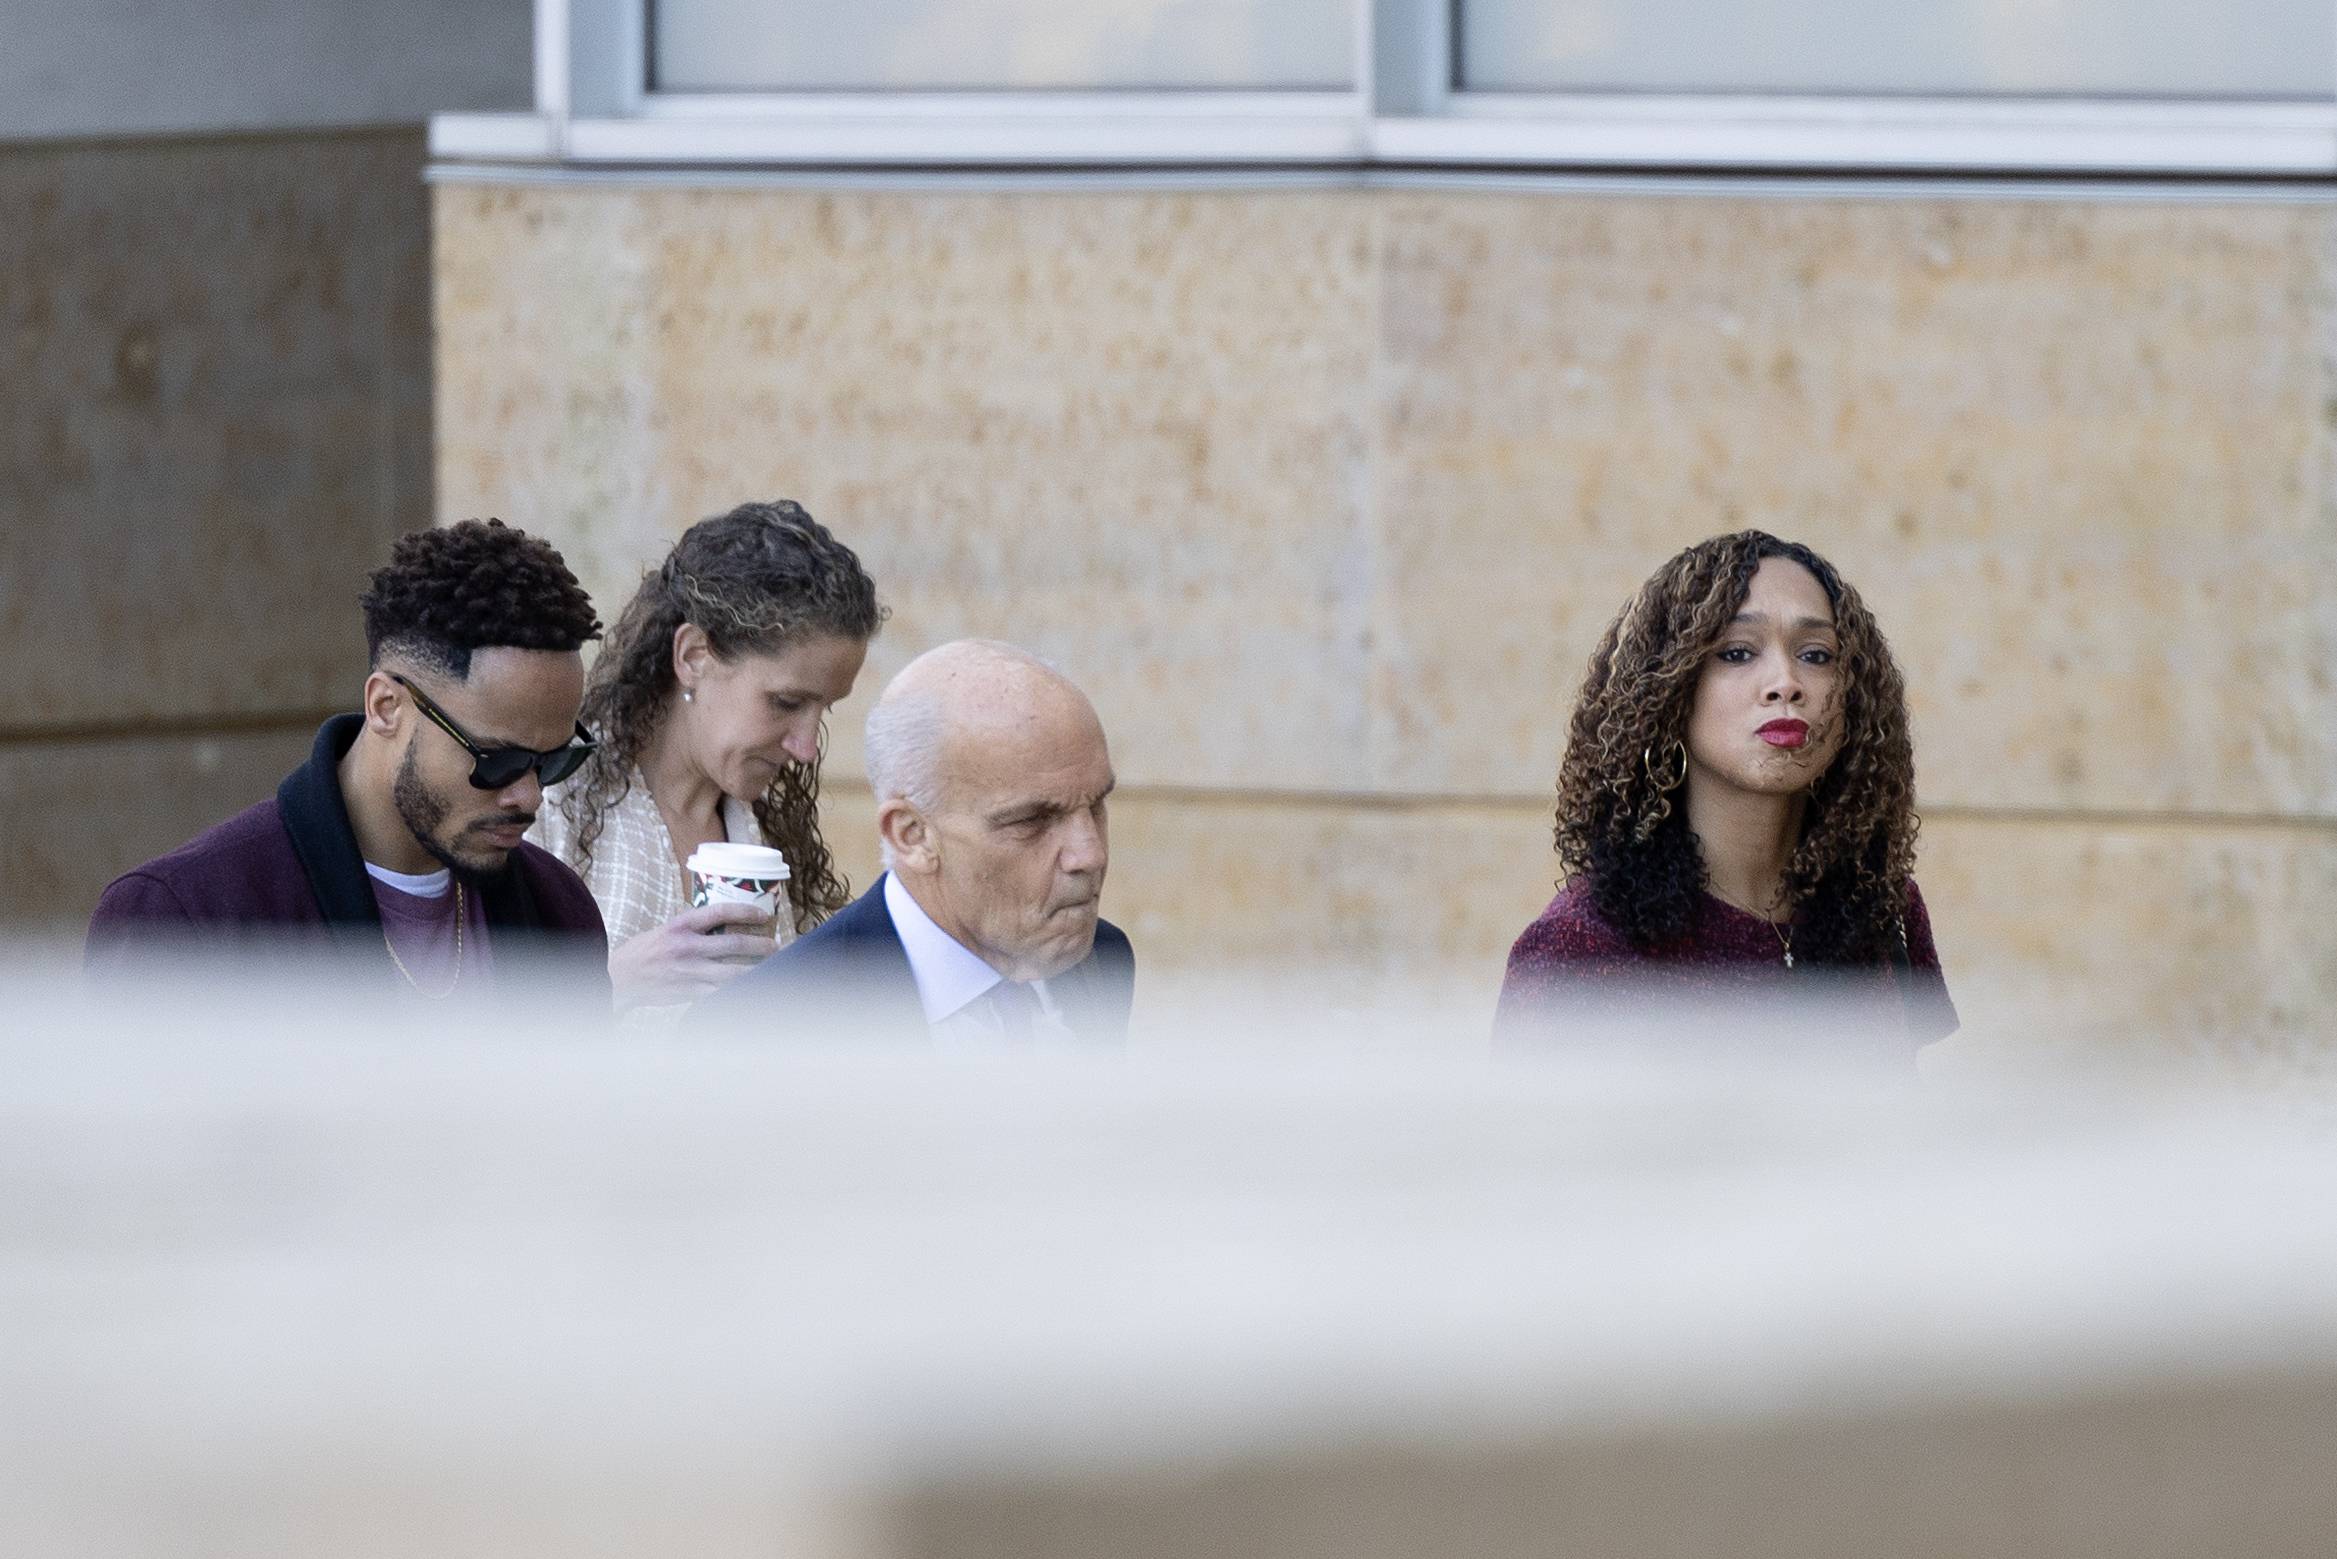 At right: Former Baltimore State’s Attorney Marilyn Mosby arrives at U.S. District Court in Greenbelt, Maryland, on Wednesday, November 8, 2023. Mosby weighed in on testifying following Tuesday’s proceedings during her federal perjury trial.